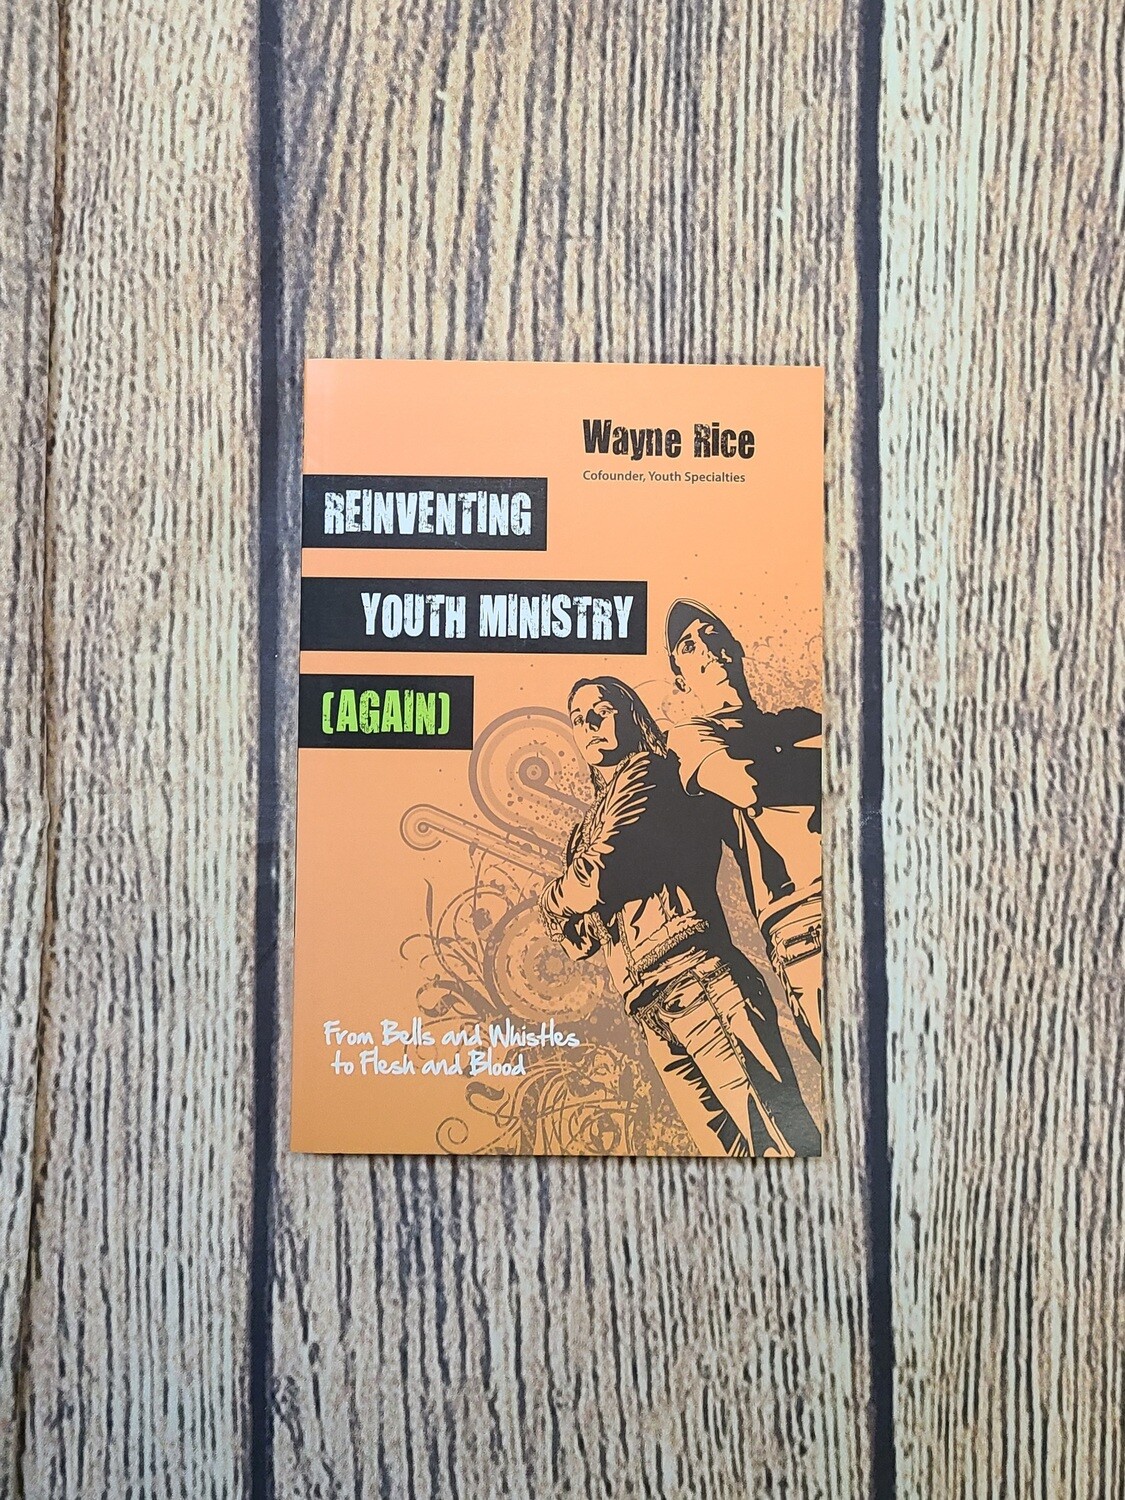 Reinventing Youth Ministry (Again) by Wayne Rice